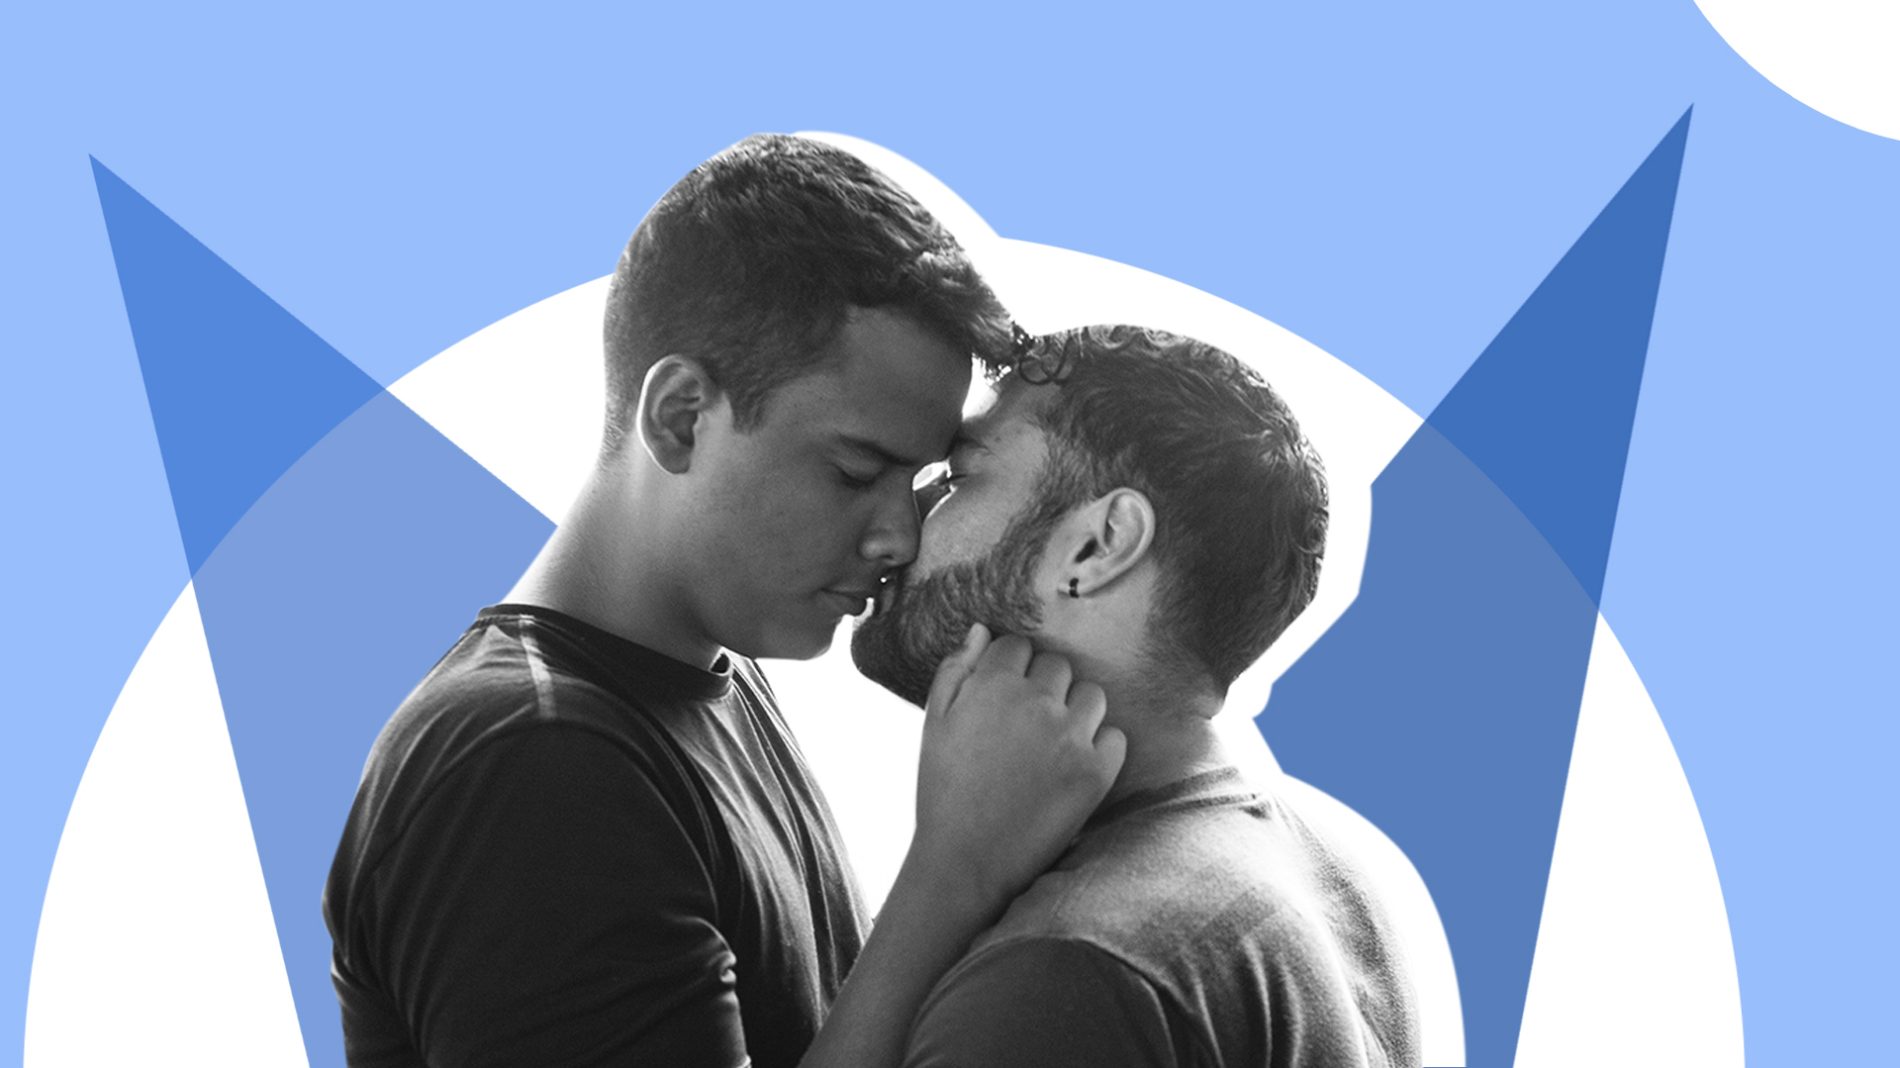 Two young men kissing in front of a blue and white background